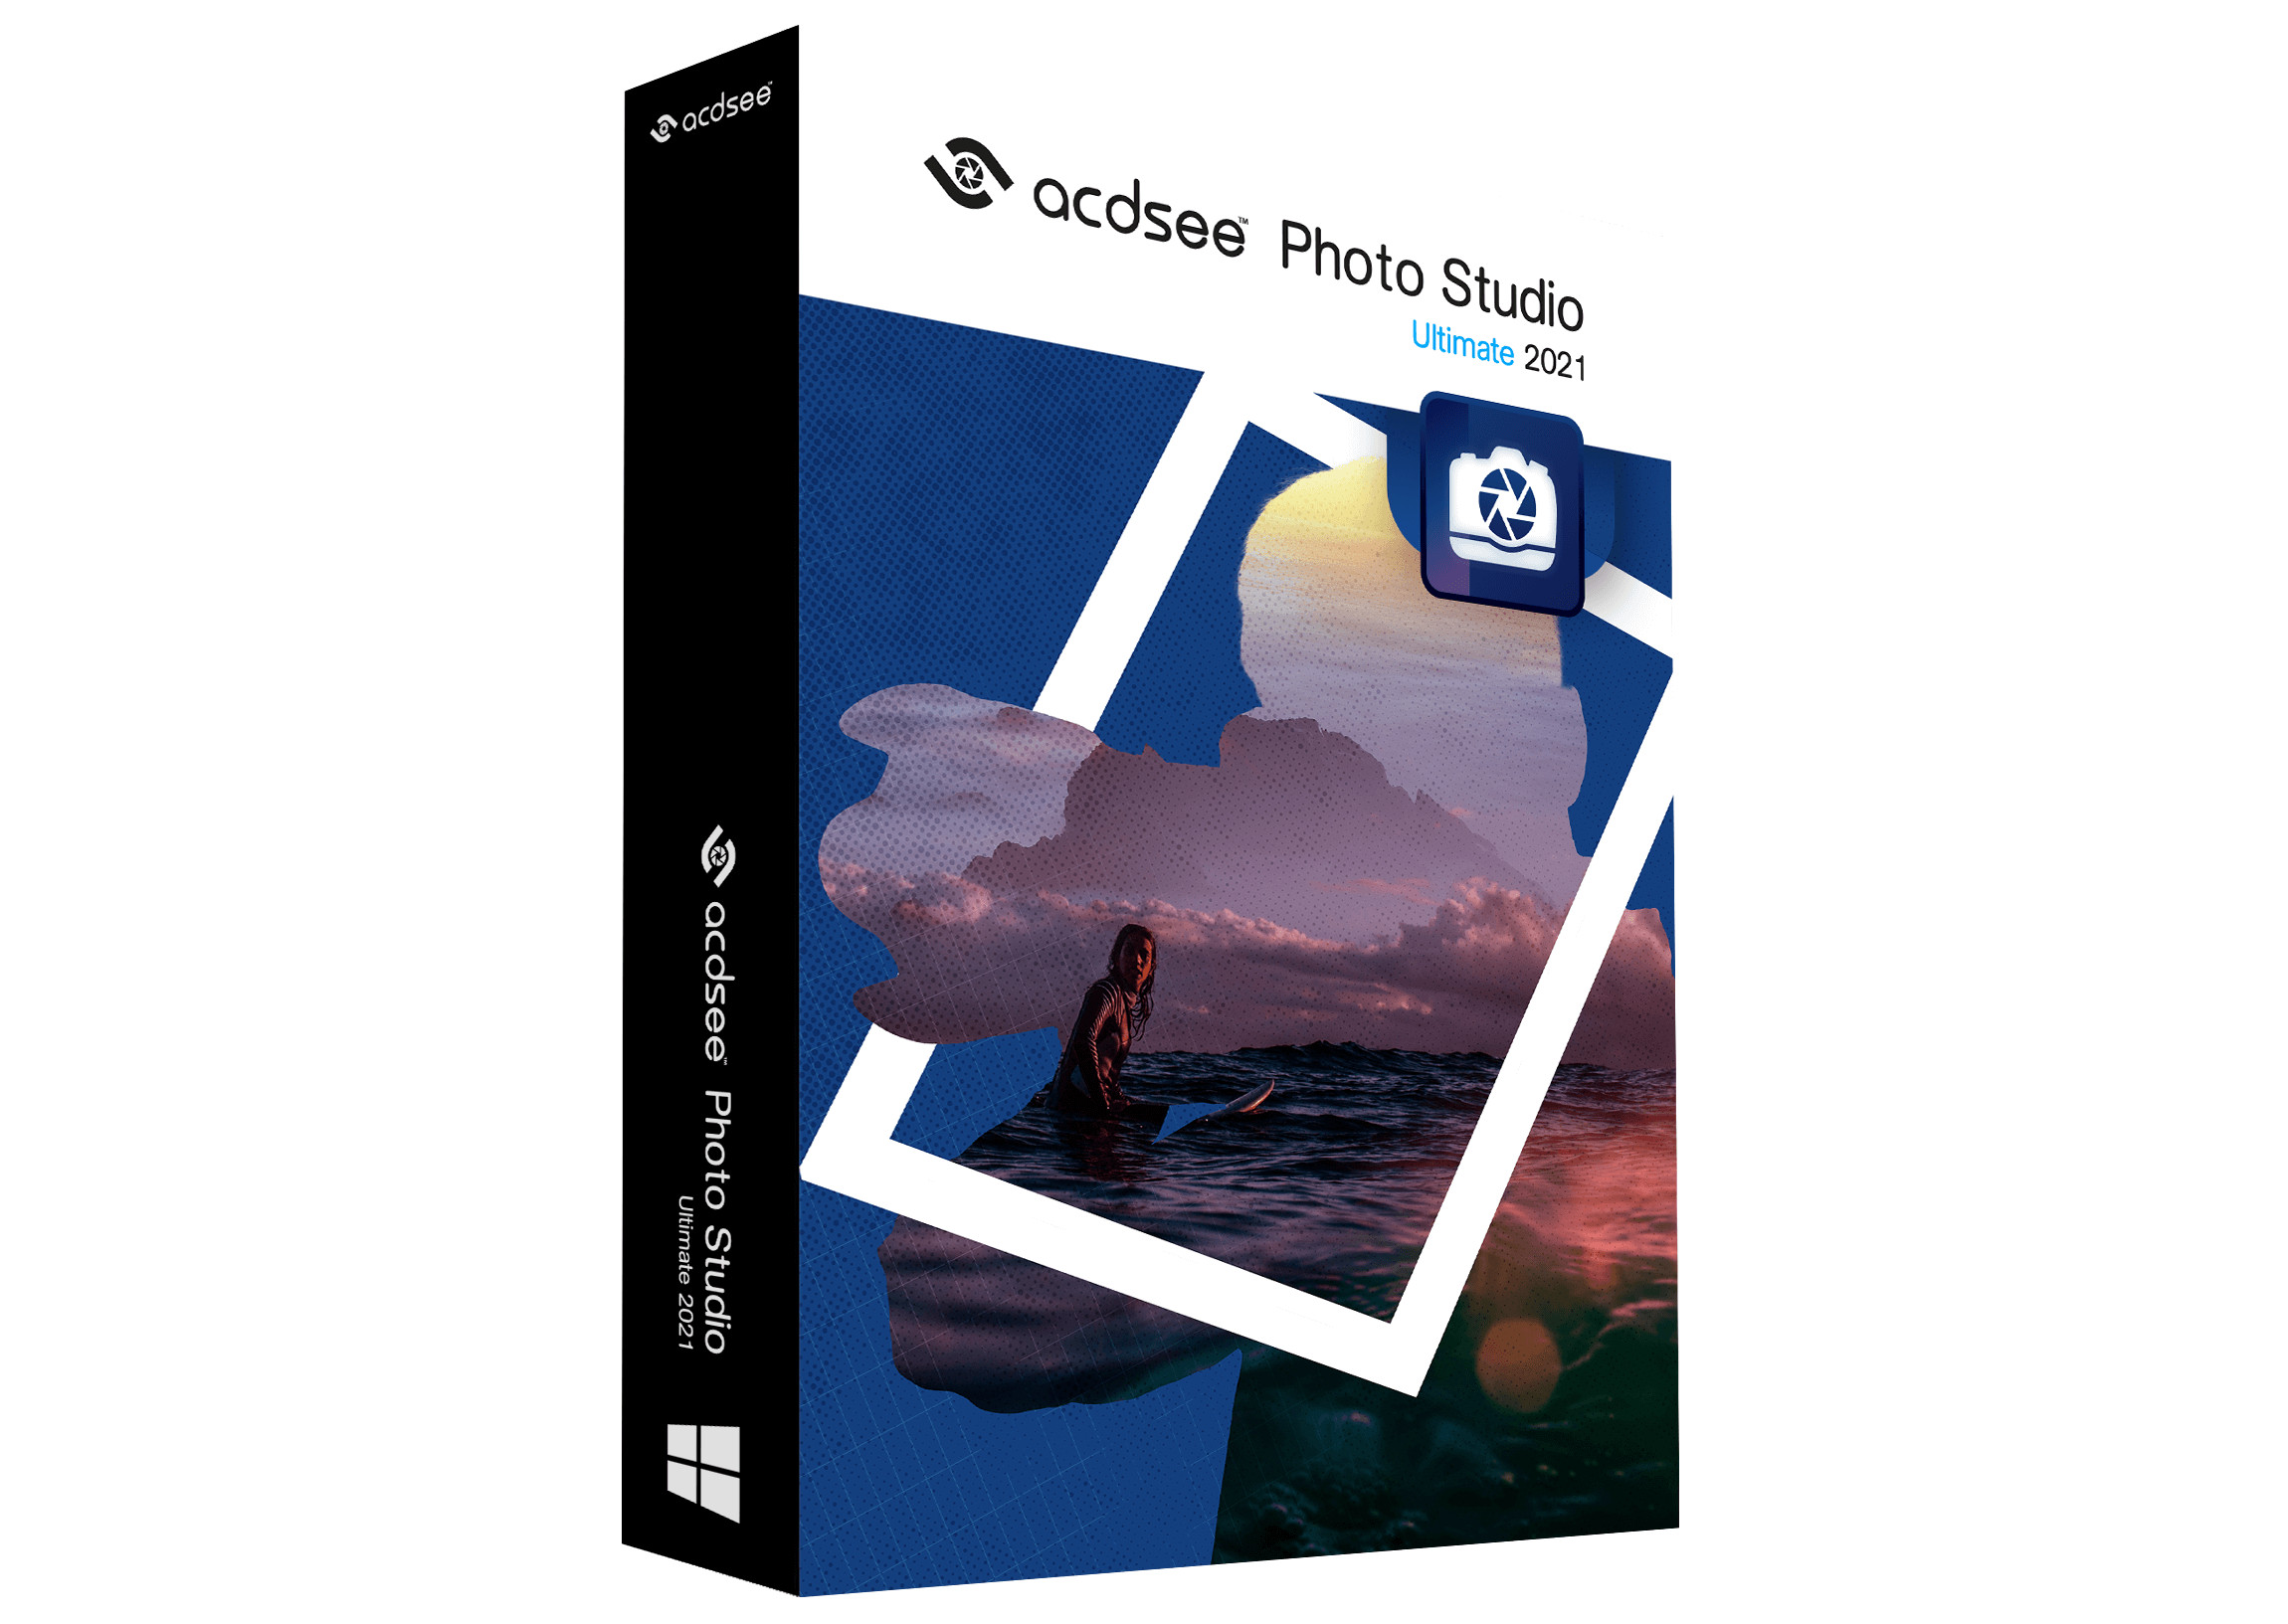 ACDSee Photo Studio Ultimate 2021 Key (6 Months / 1 PC) 11.29 $